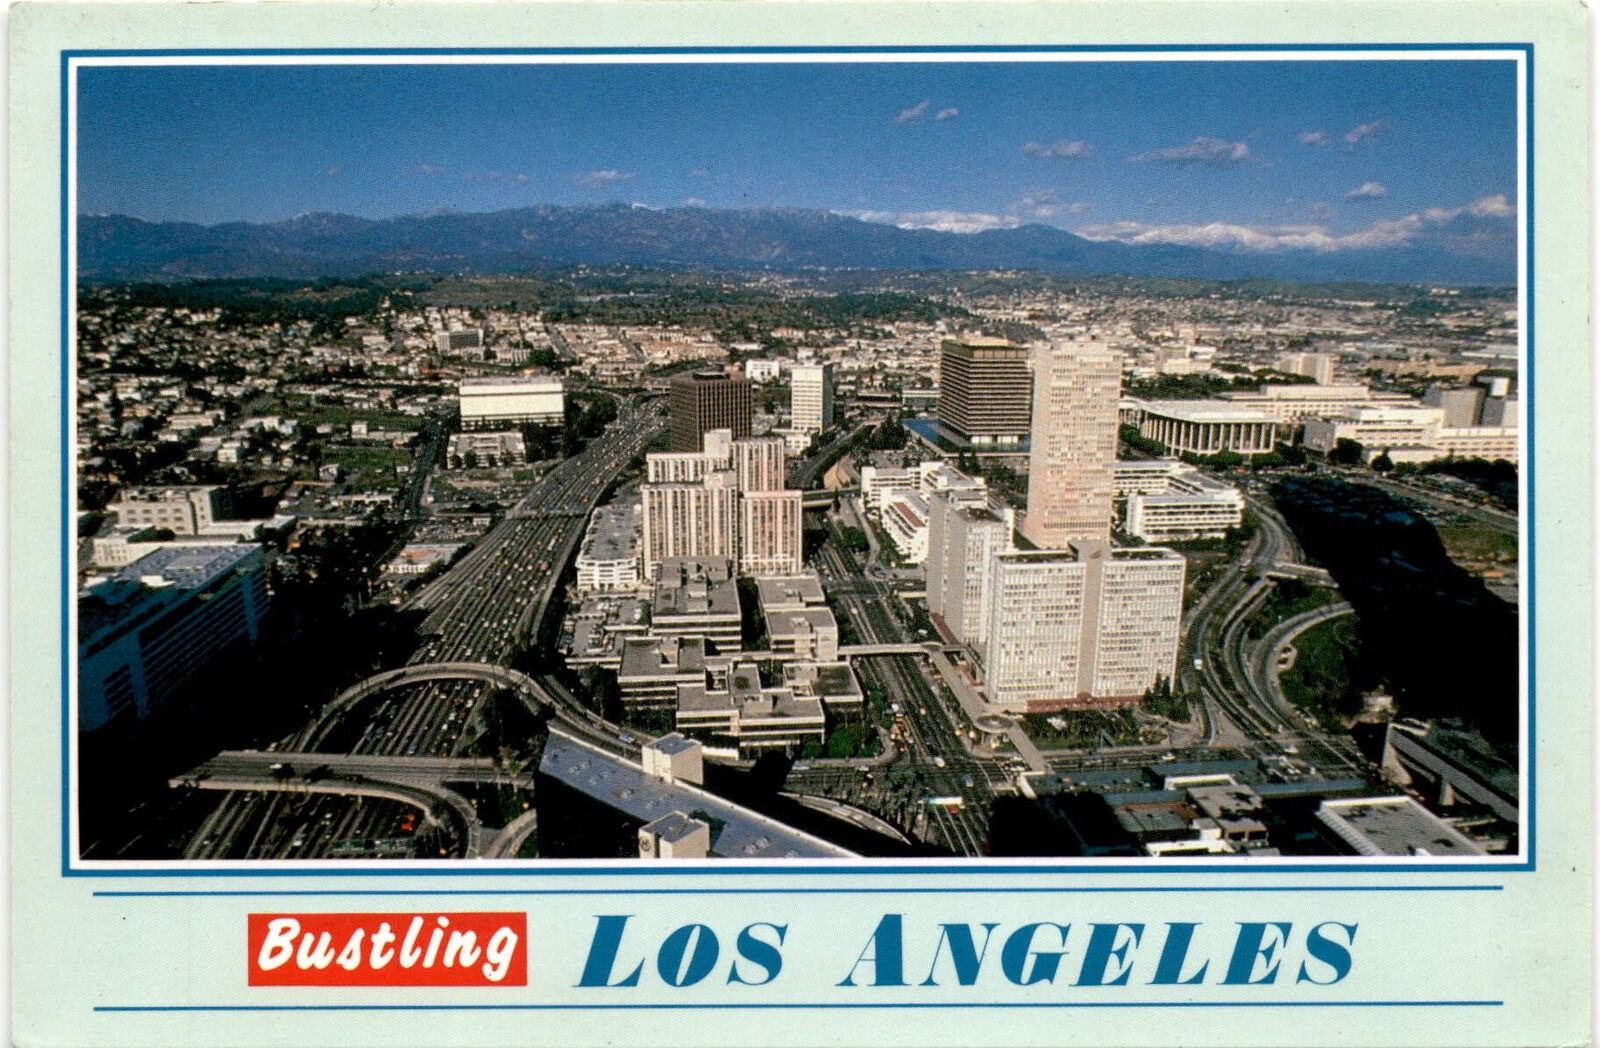 Los Angeles, California, Portage, PA, Hollywood, Beverly Hills Postcard